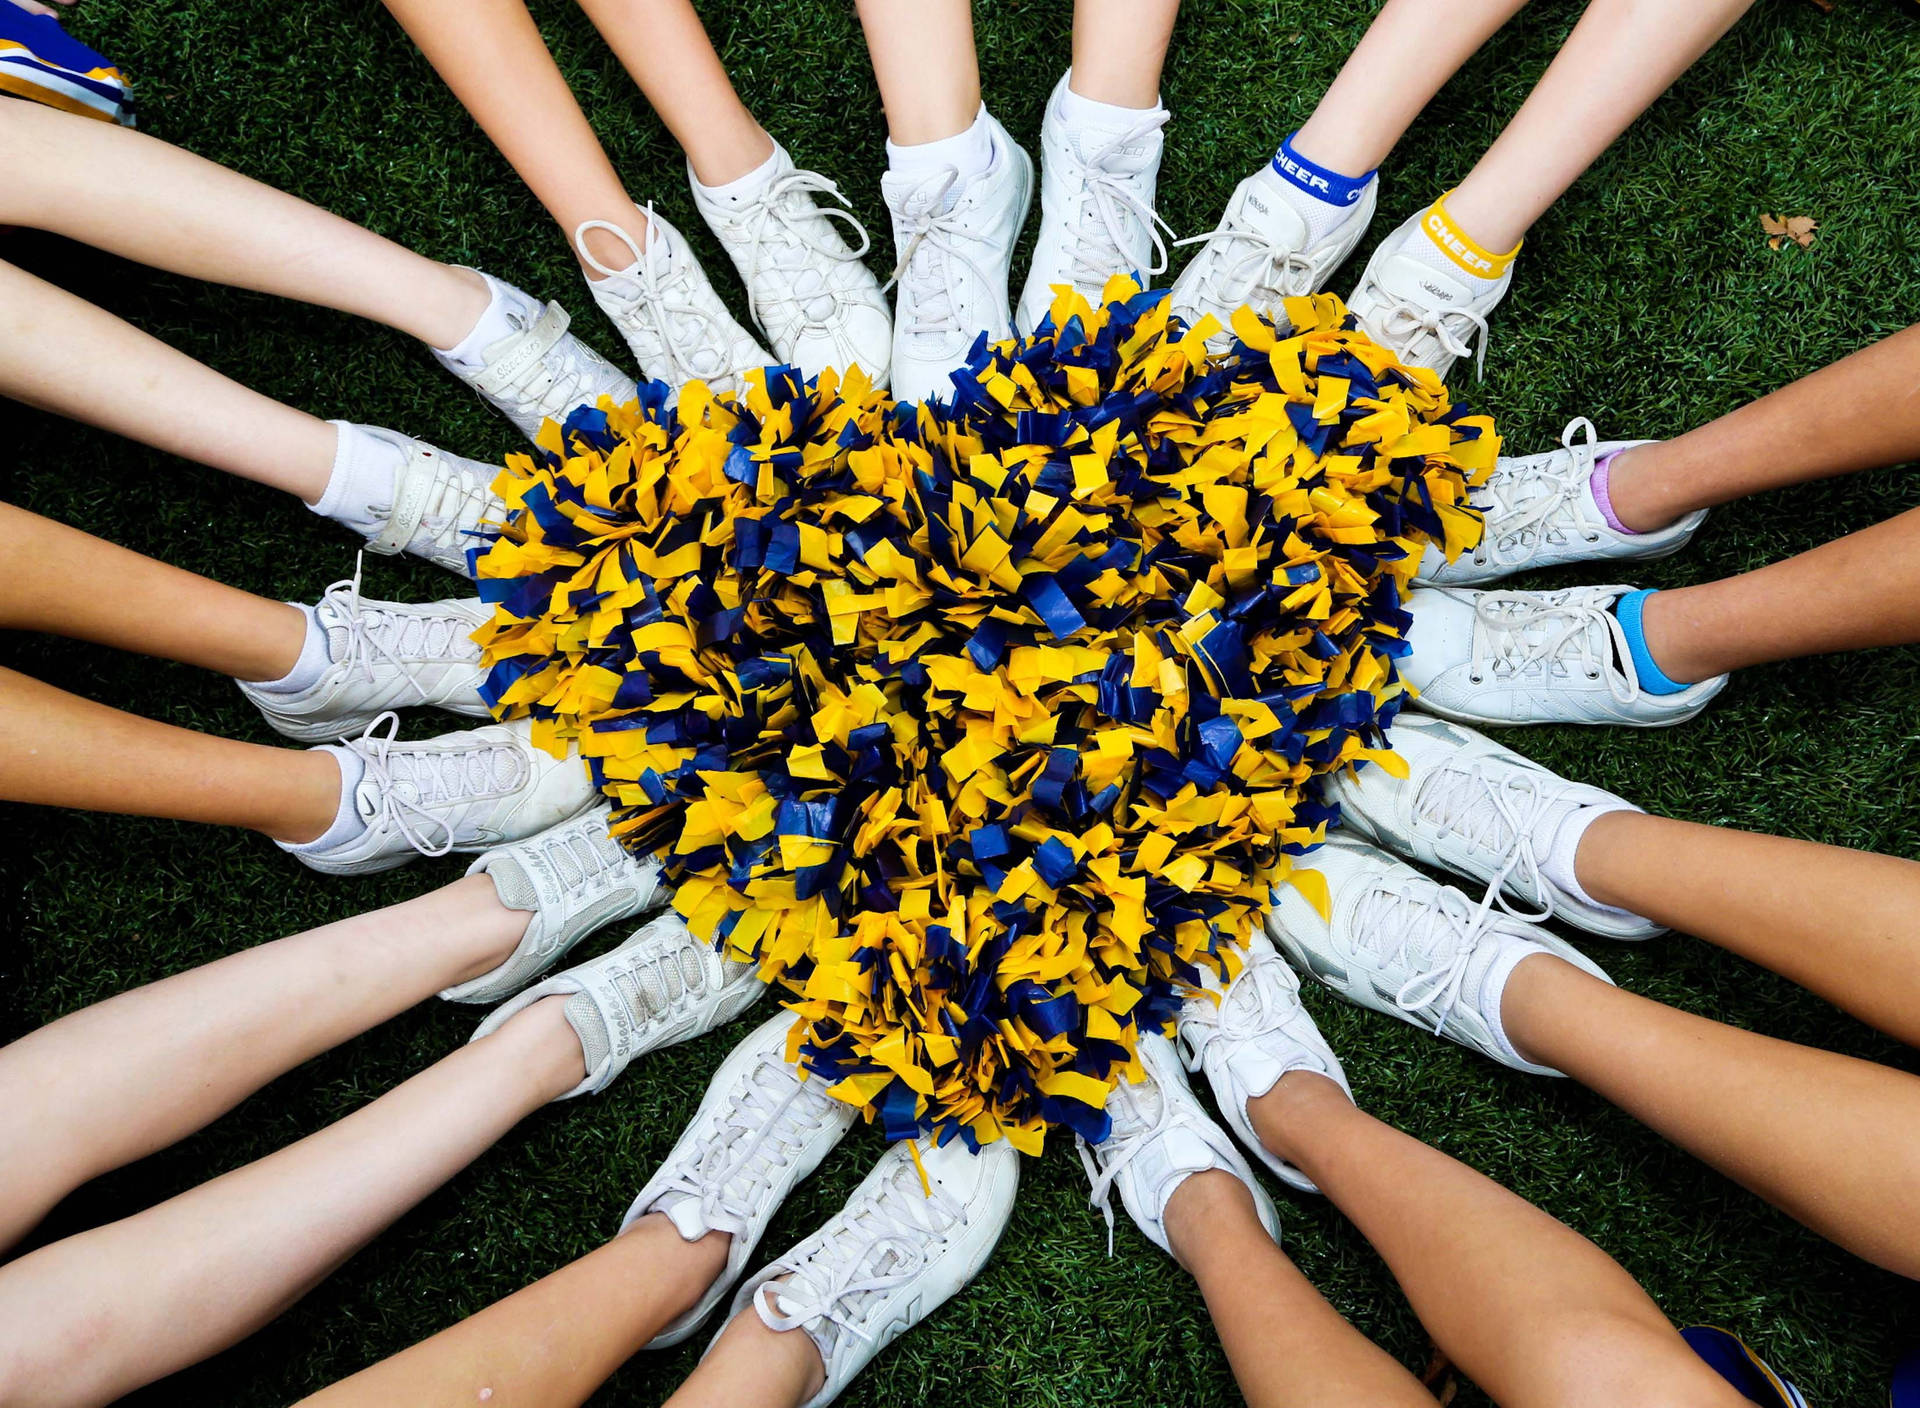 Download Cheerleader Shoes Forming A Heart Wallpaper